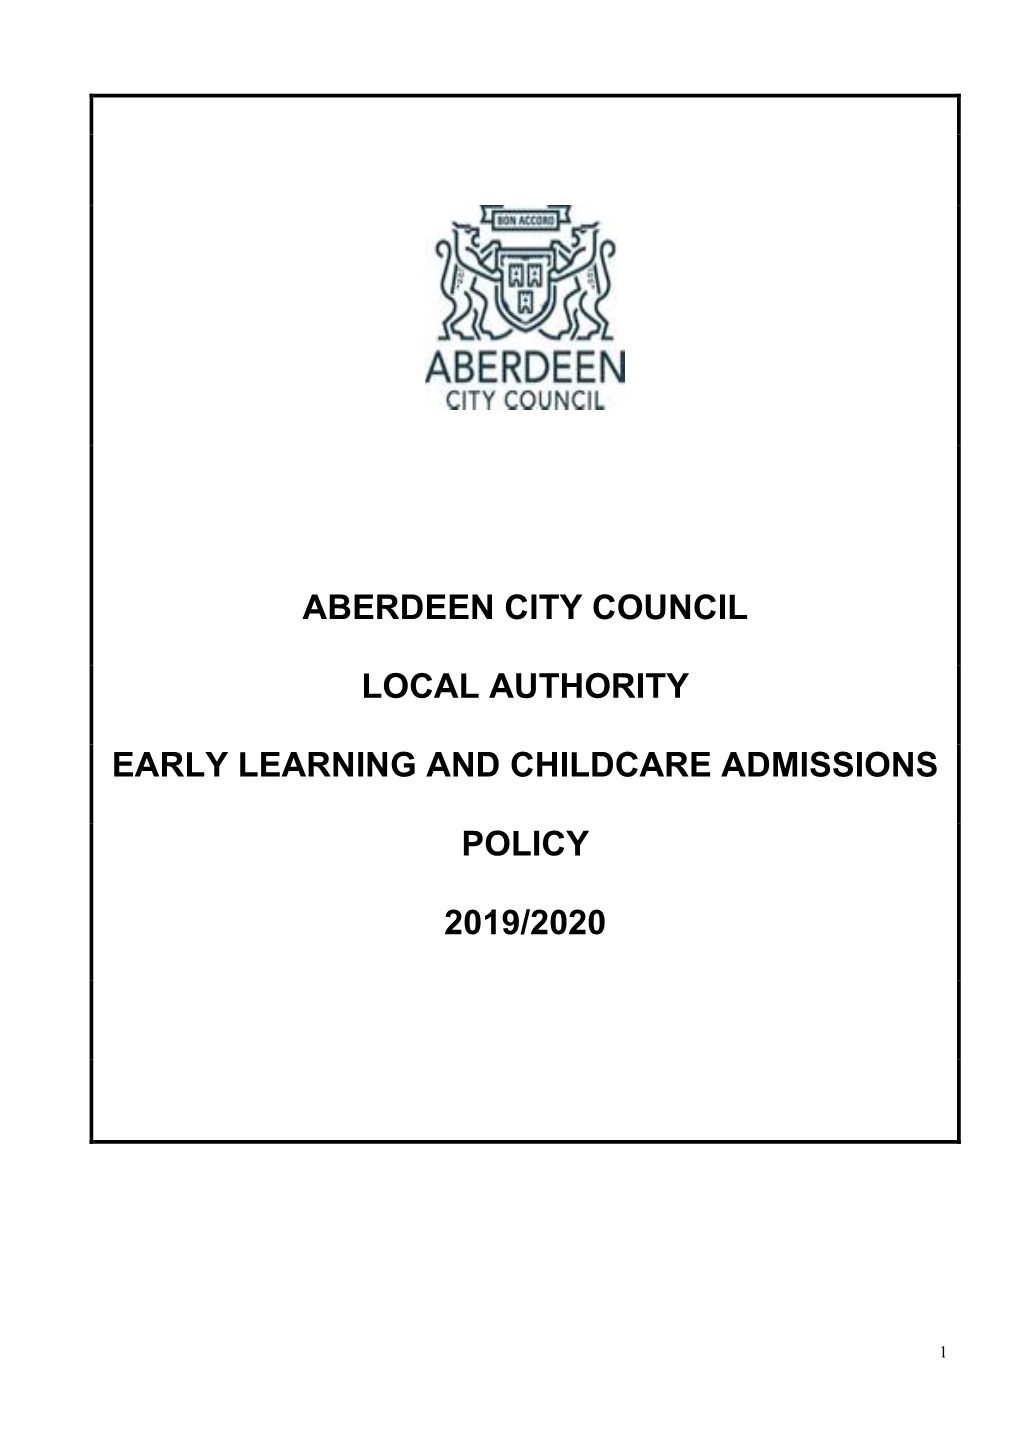 Aberdeen City Council Local Authority Early Learning and Childcare